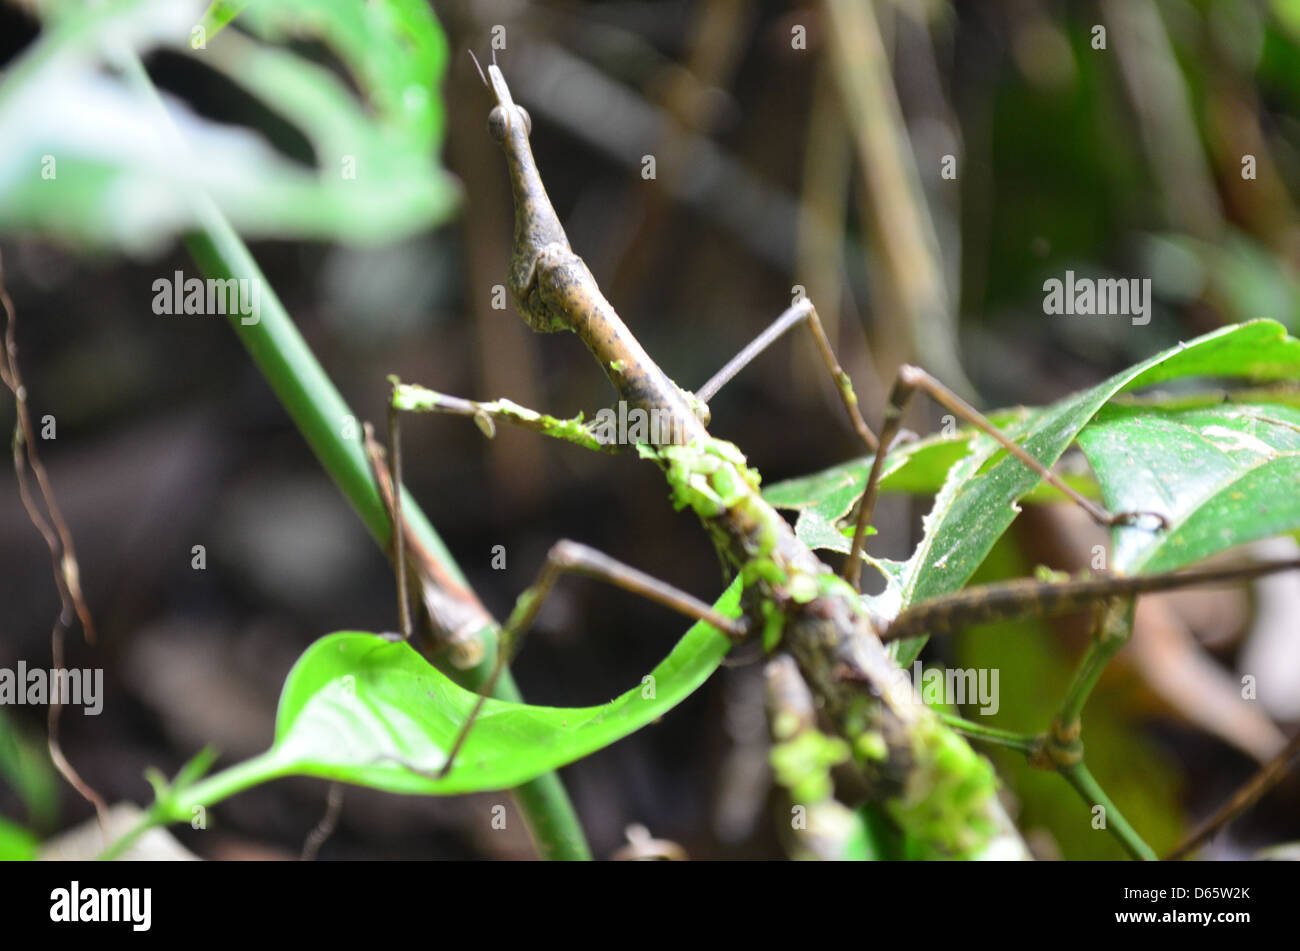 Stick insect camouflaged against leafs and branches in the Amazon rainforest Stock Photo